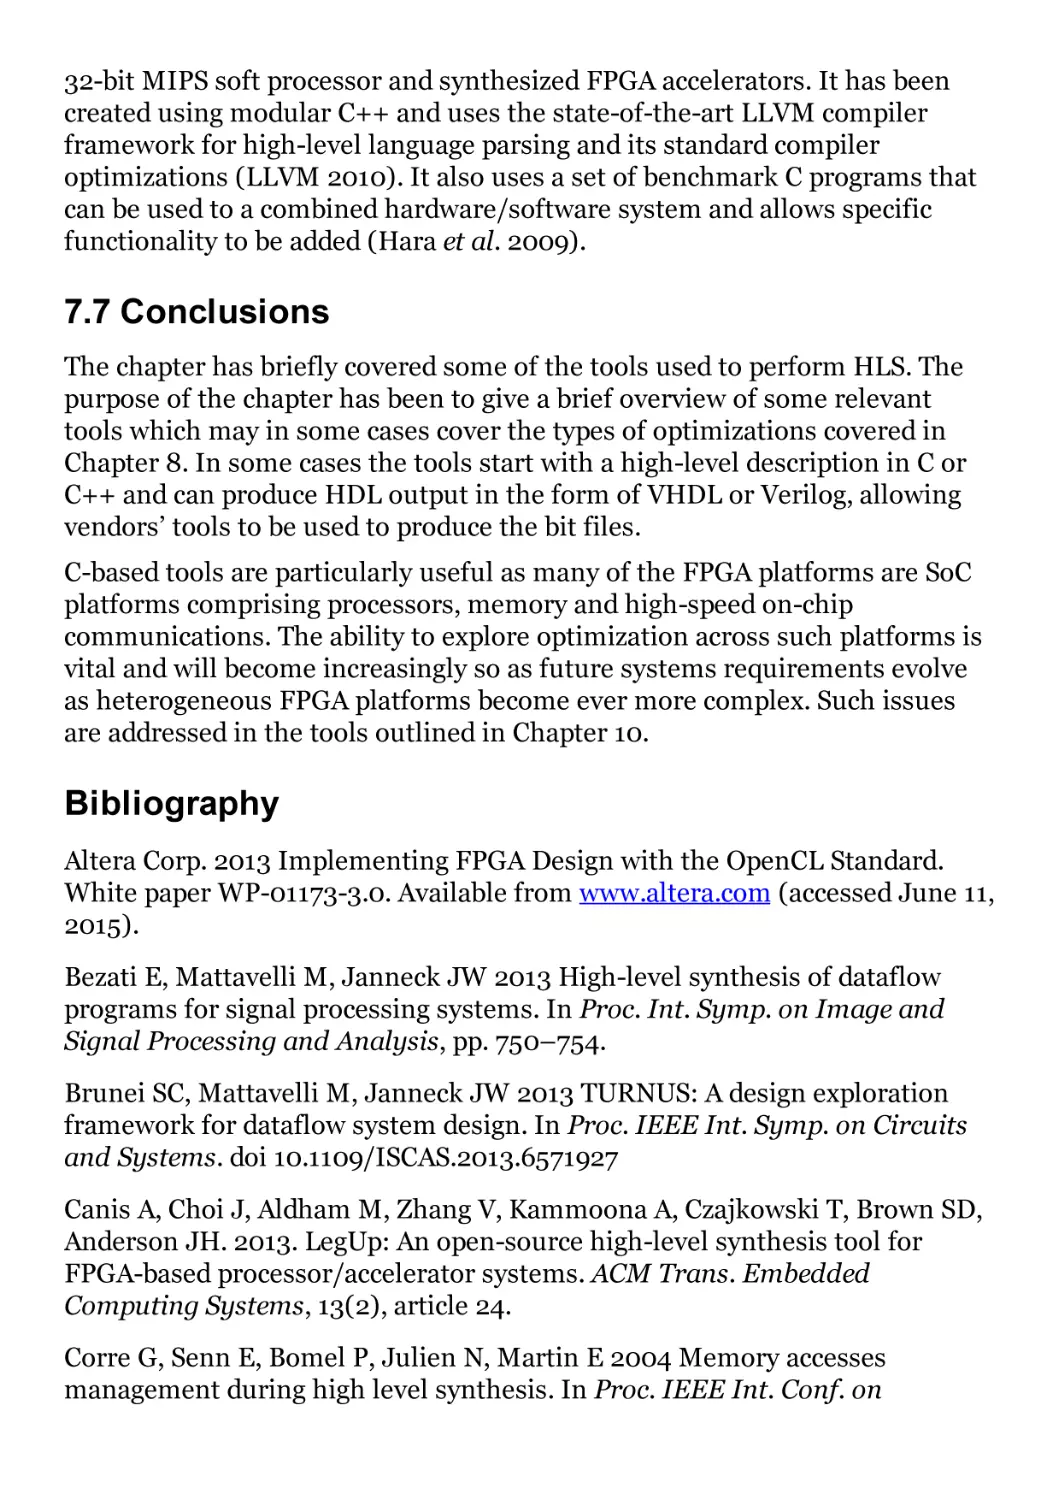 7.7 Conclusions
Bibliography